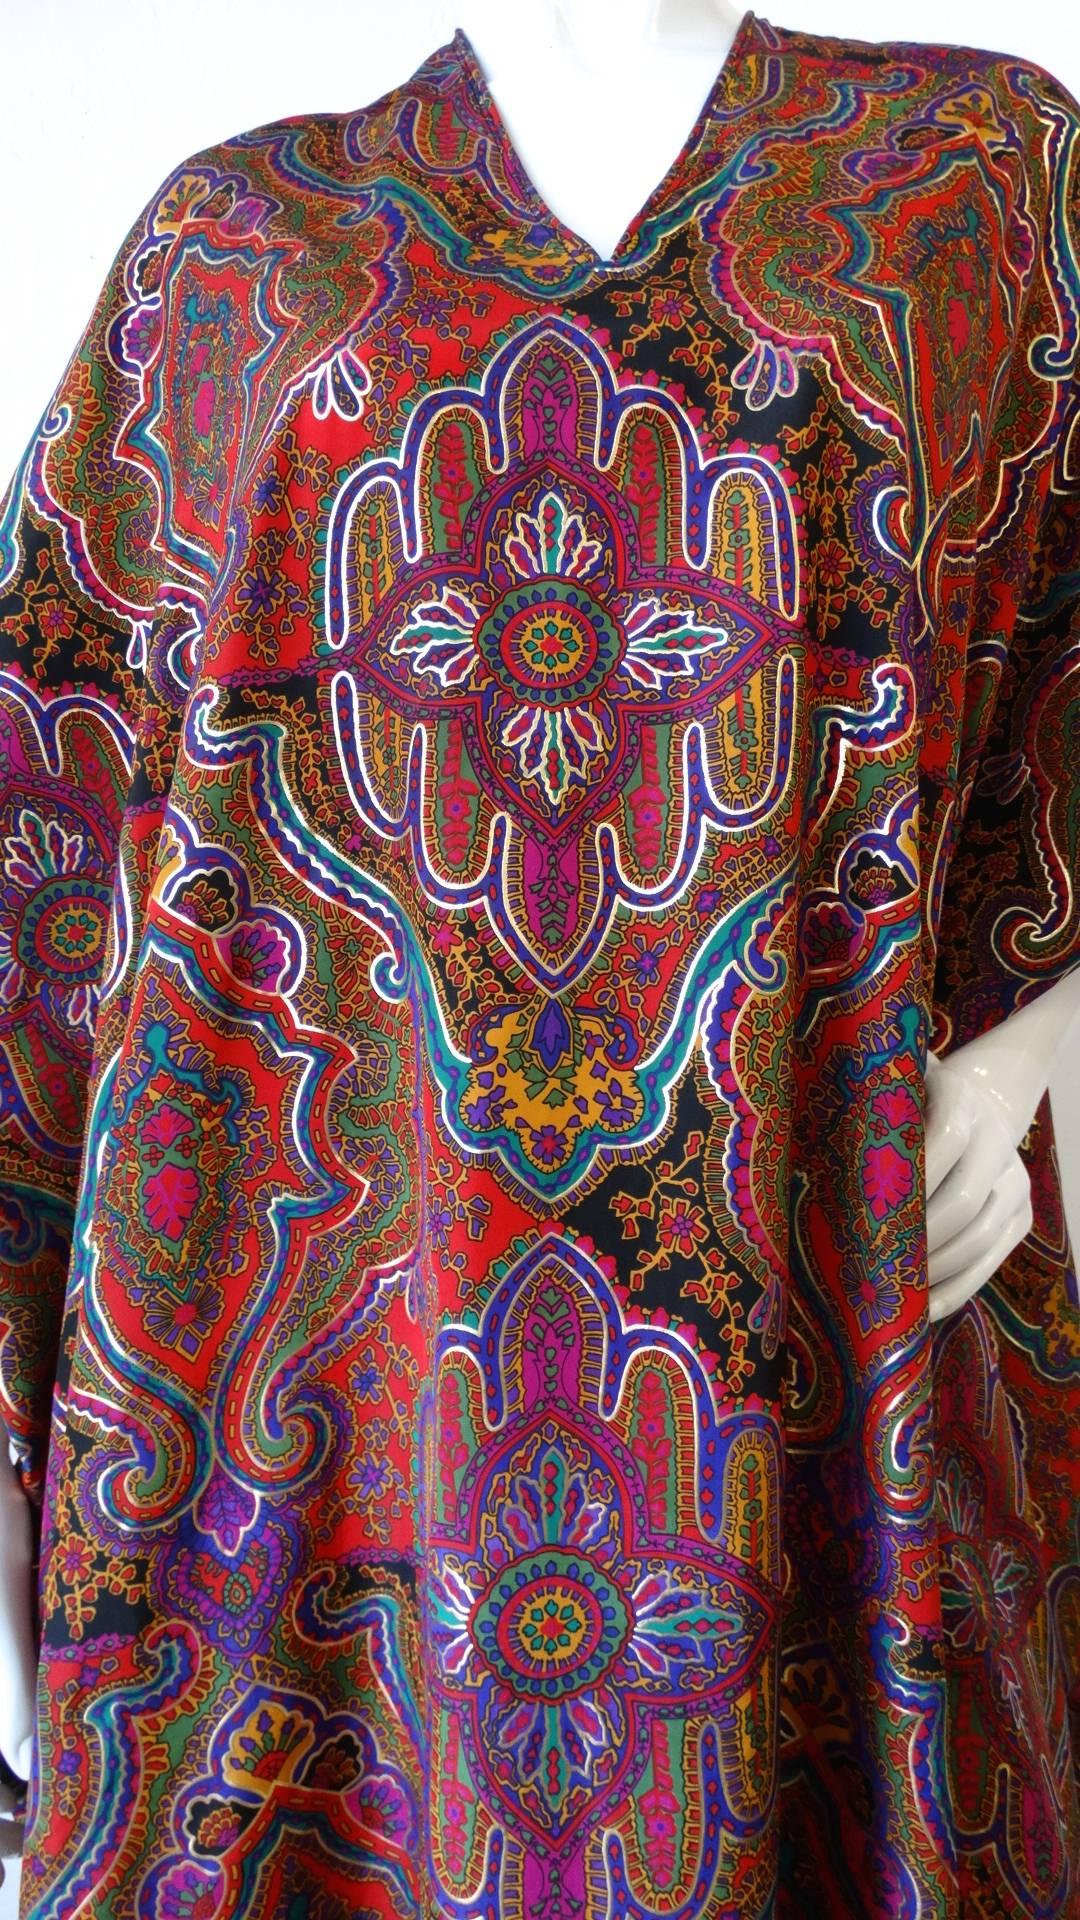 Get groovy in this amazing 1980s does 70s Oscar De La Renta for Swirl caftan! Printed with an amazing Moroccan inspired psychedelic print in shades of red, gold and violet. Loose, flowing caftan fit with maxi length and short sleeves. The perfect